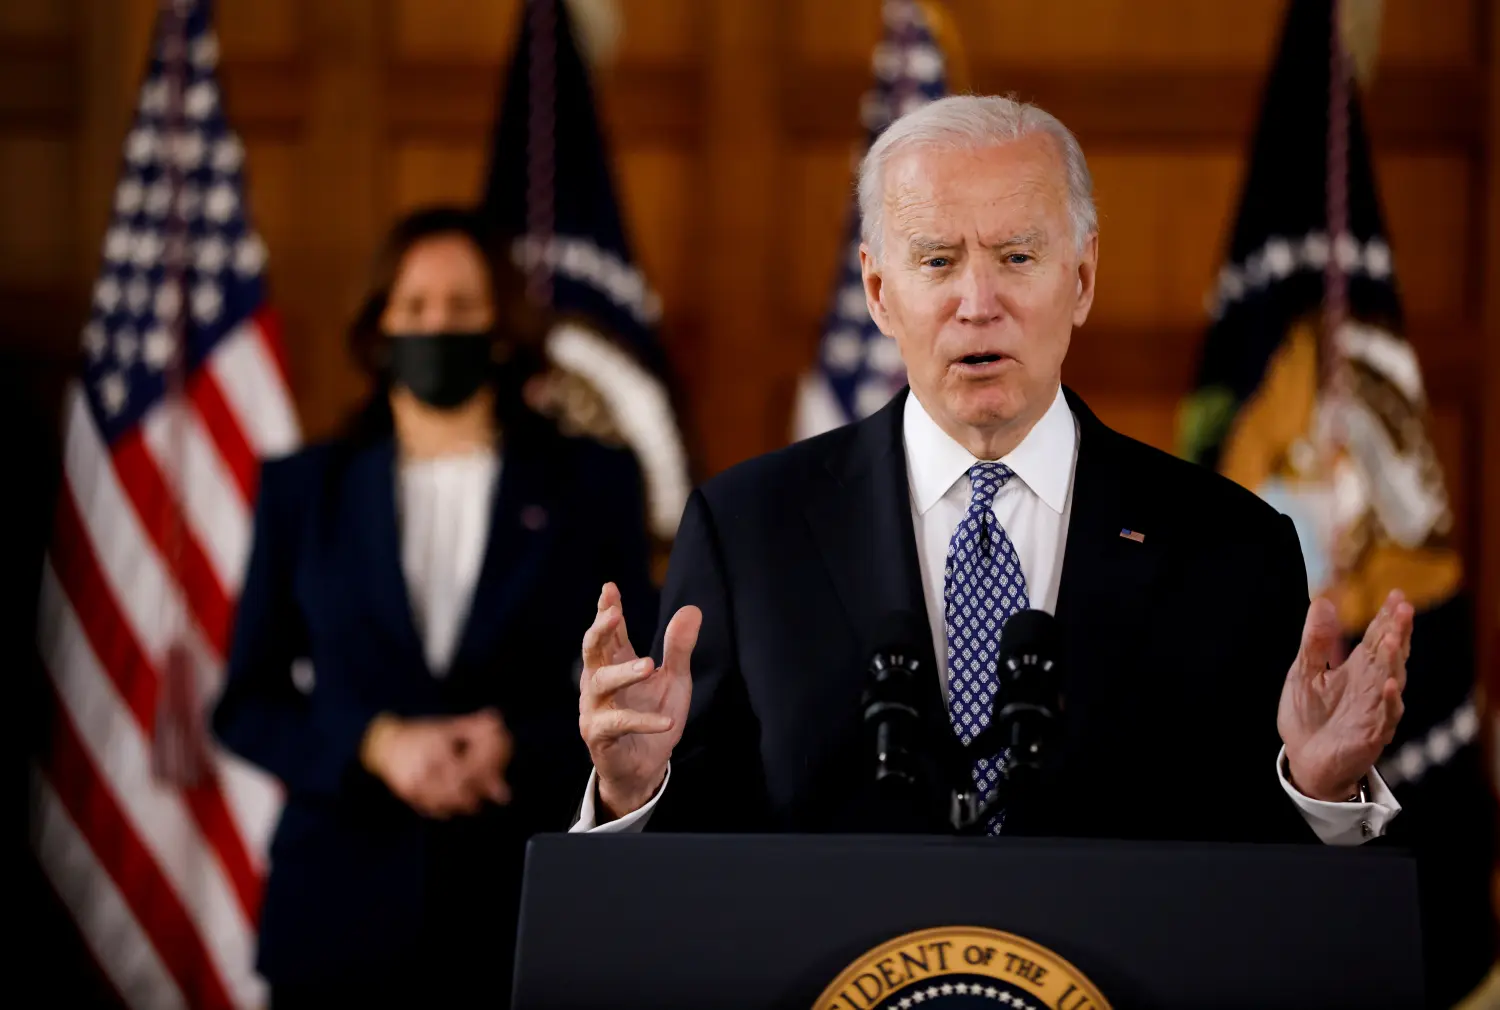 FILE PHOTO: U.S. President Joe Biden and Vice President Kamala Harris deliver remarks after meeting with Asian-American leaders to discuss "the ongoing attacks and threats against the community," during a stop at Emory University in Atlanta, Georgia, U.S., March 19, 2021. REUTERS/Carlos Barria/